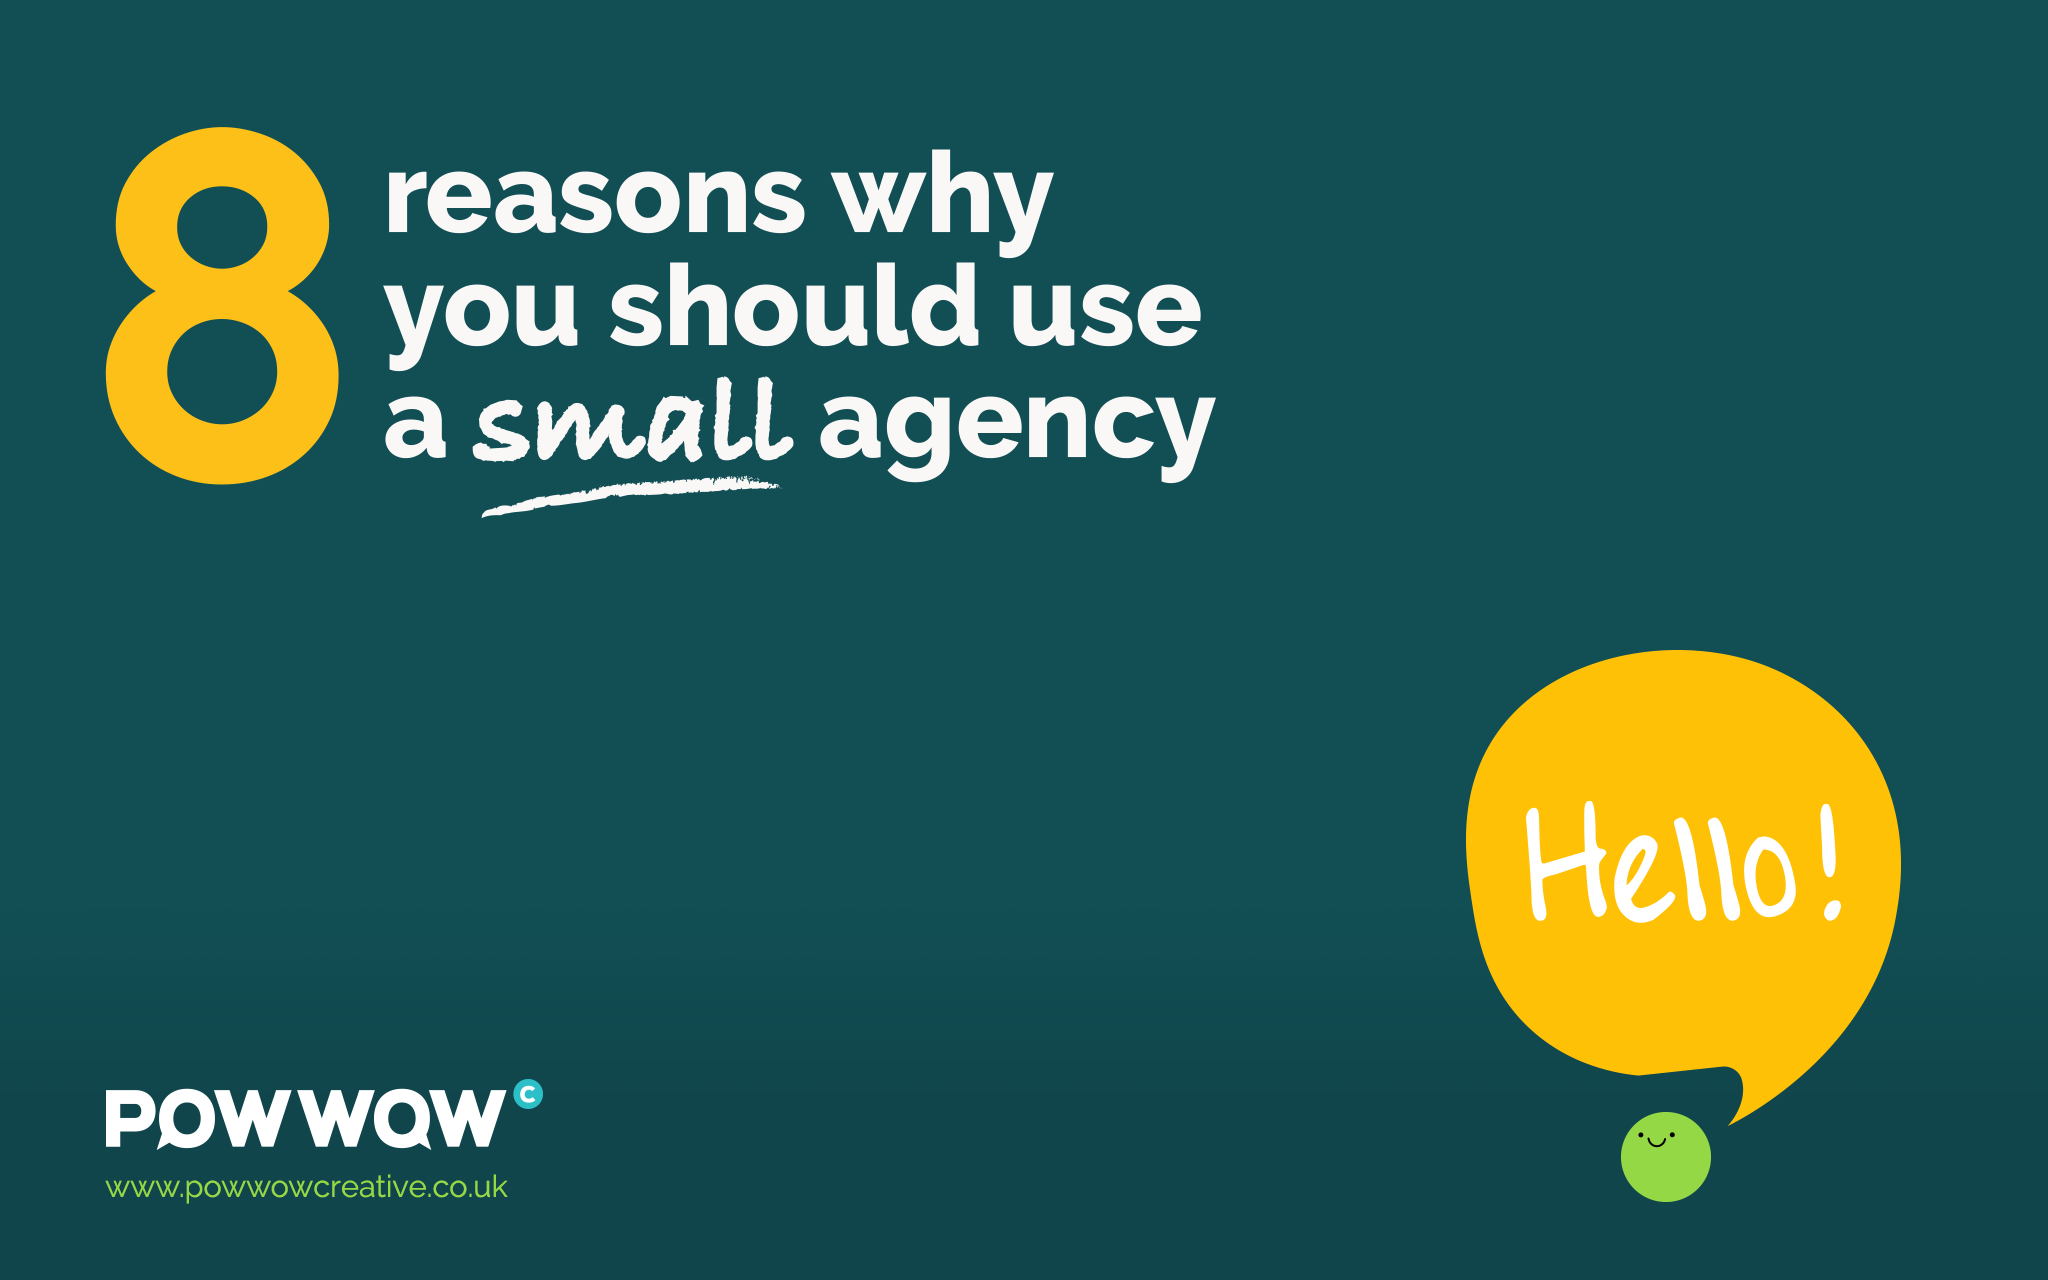 Powwow - 8 reasons why you should use a small agency